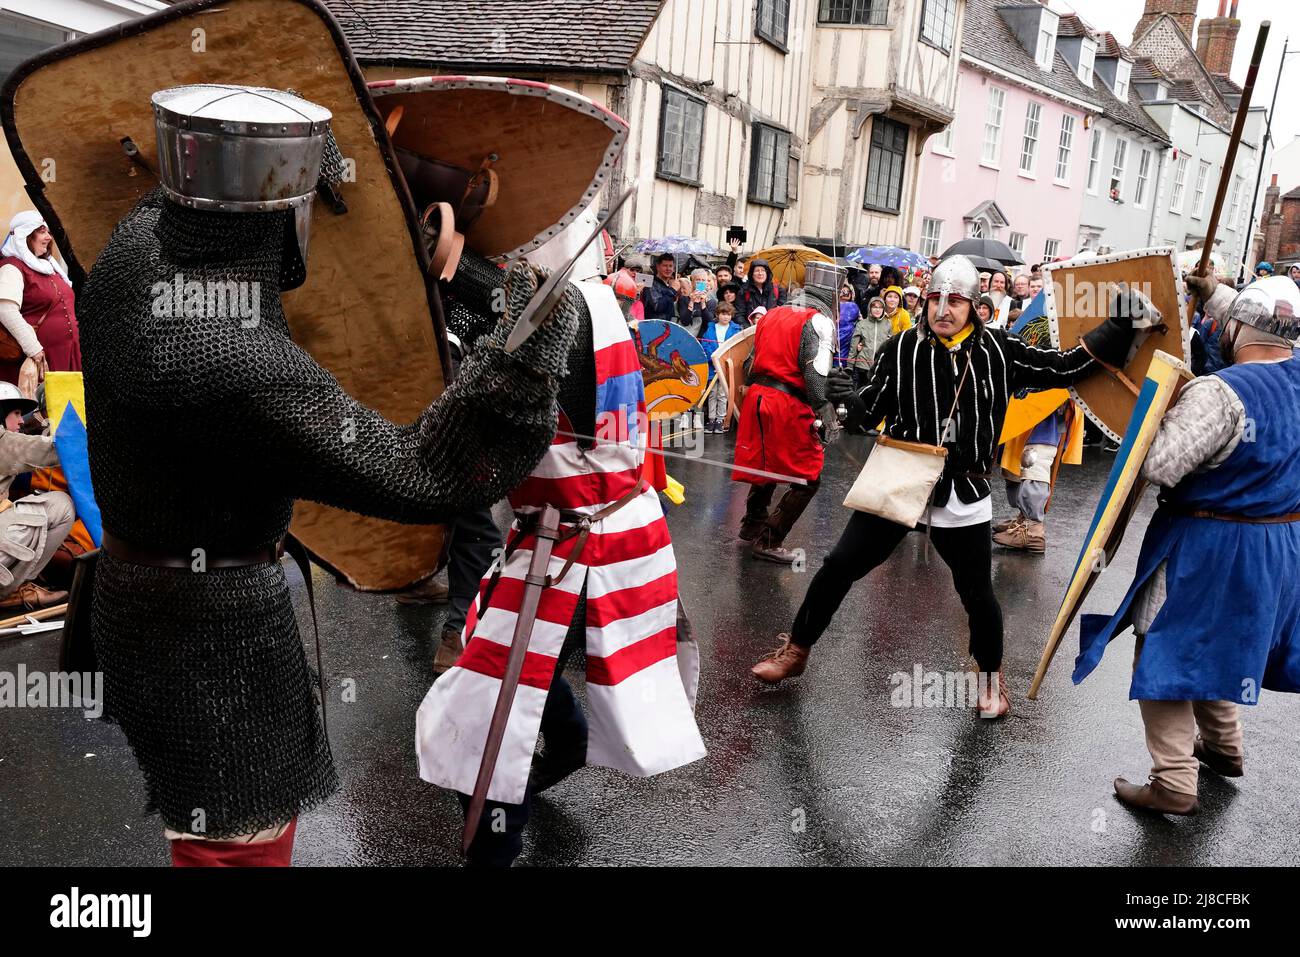 Lewes, UK. 15th May 2022. People in medieval costume re-enact the historic 1264 Battle of Lewes by marching through the streets and taking part in mock battles at various points throughout the town. Grant Rooney/Alamy Live News Stock Photo